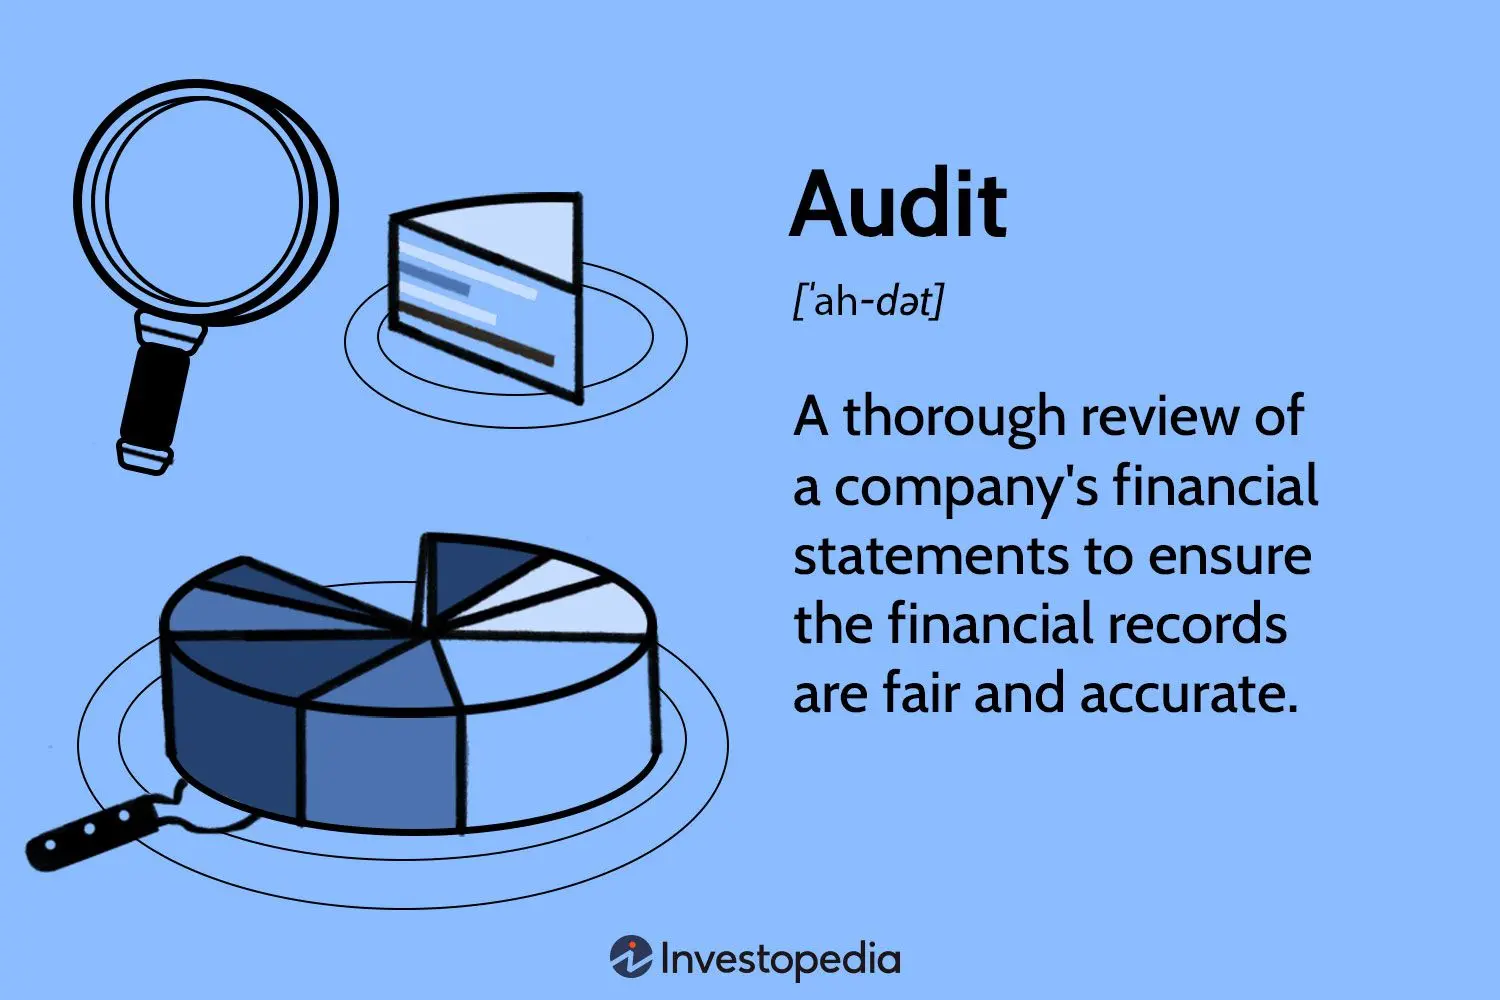 accounting and financial auditor - What is the difference between financial accounting and financial auditing